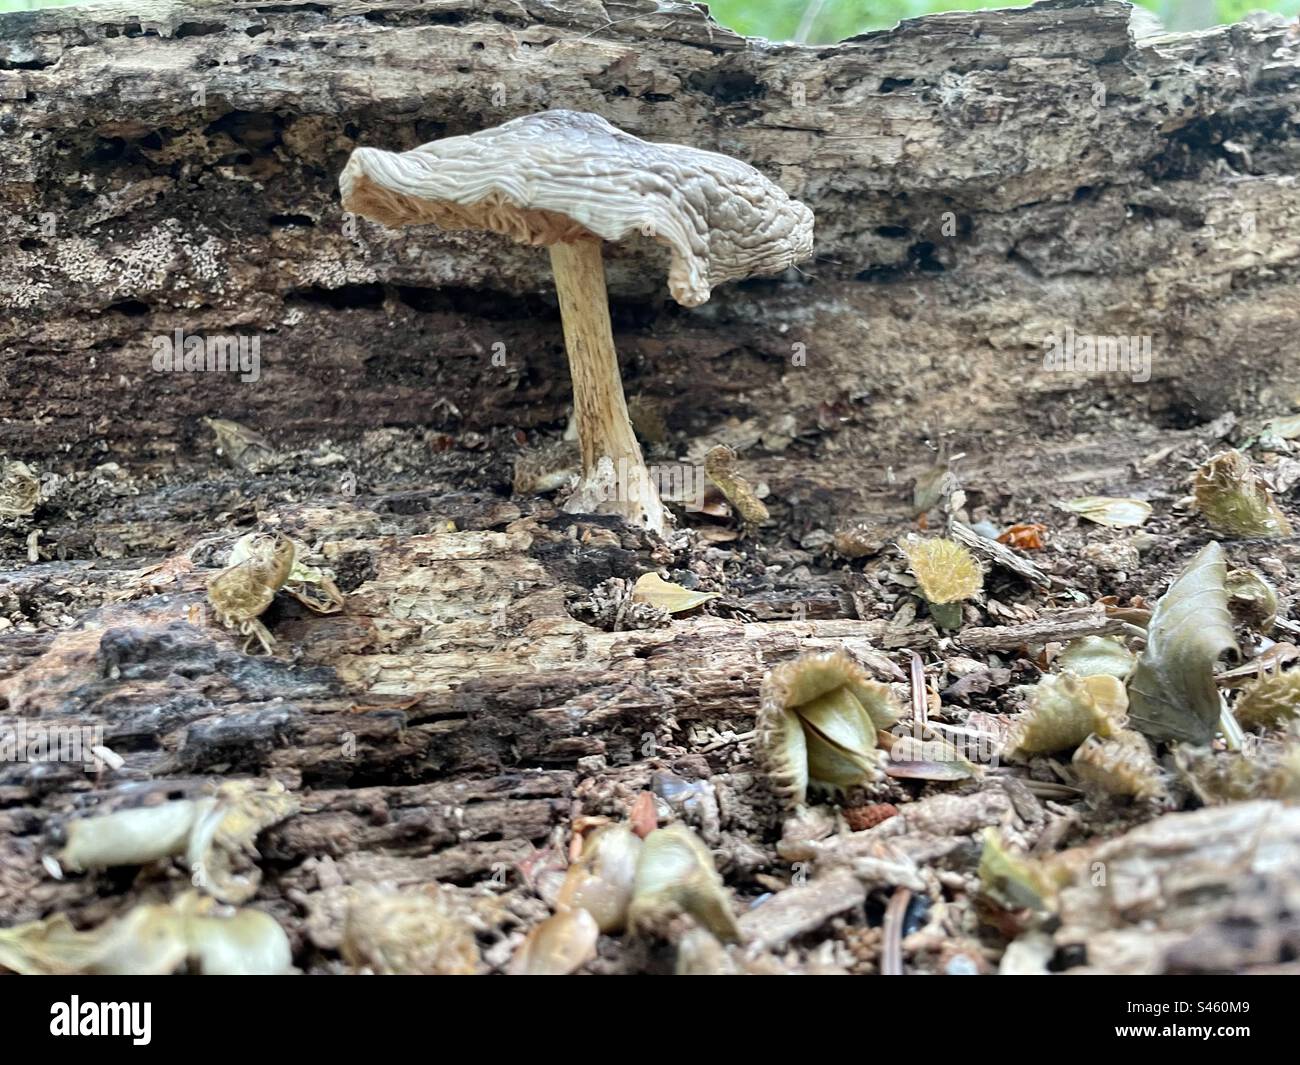 Fungus growing on a rotting fallen tree trunk. Stock Photo